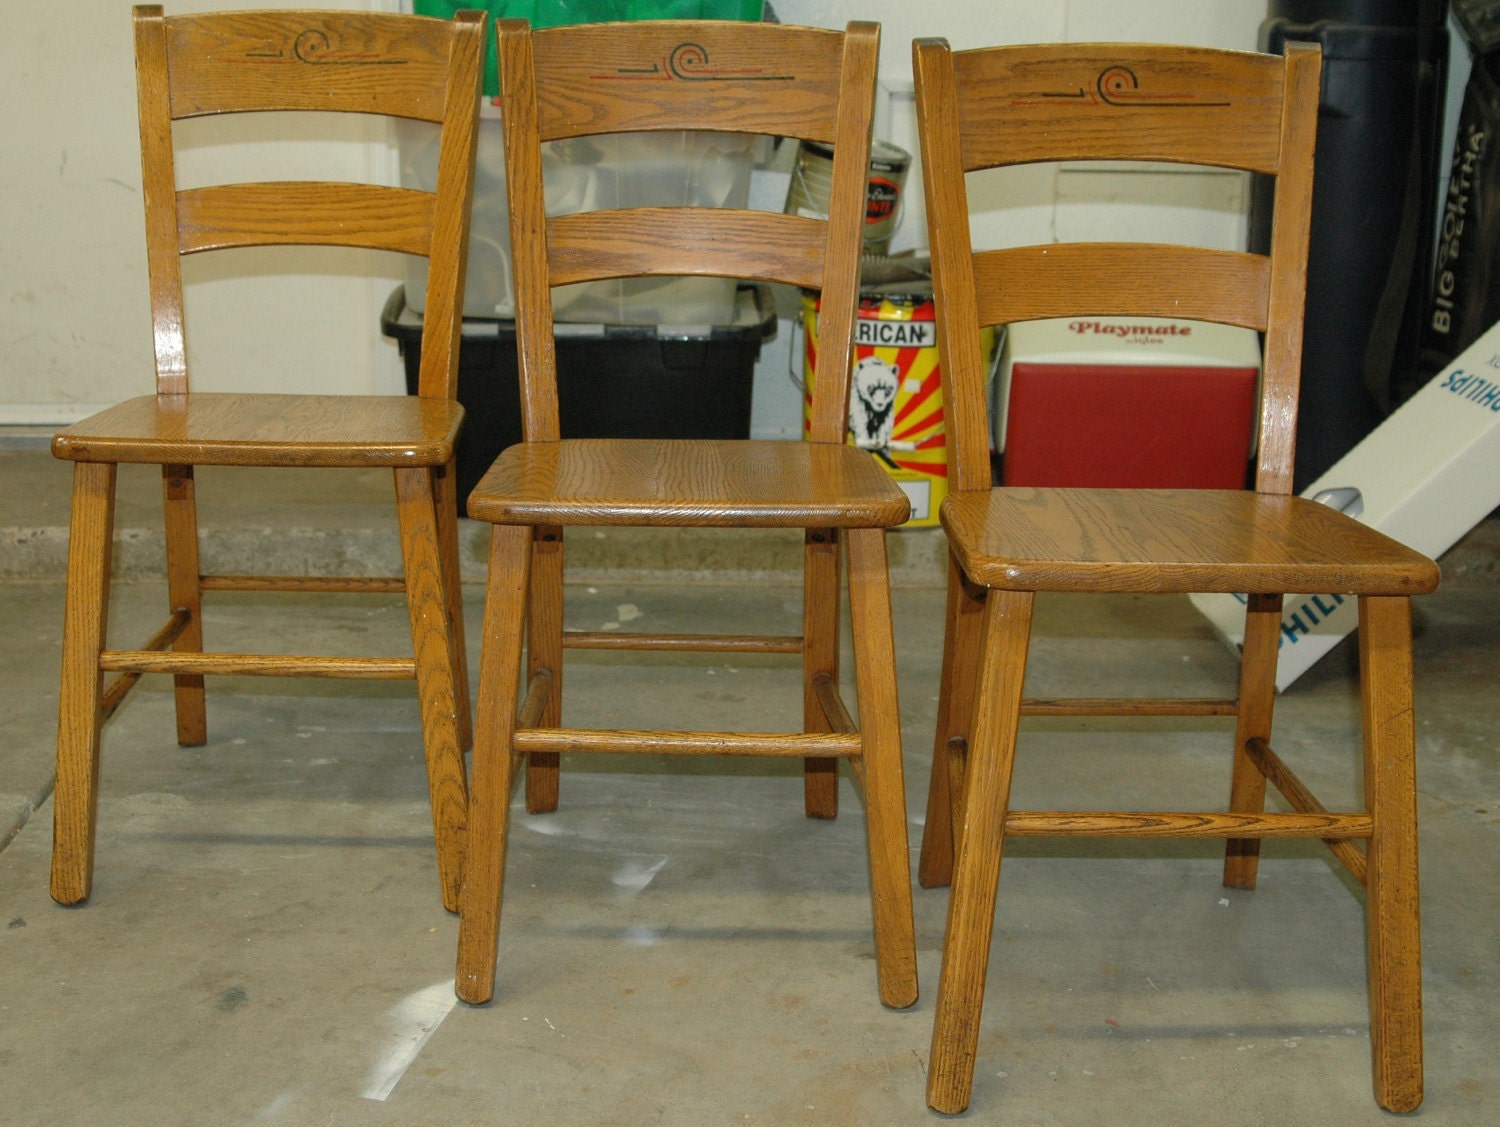 Richardson Brothers Oak Chairs Farm Fresh by goodwillhunting1